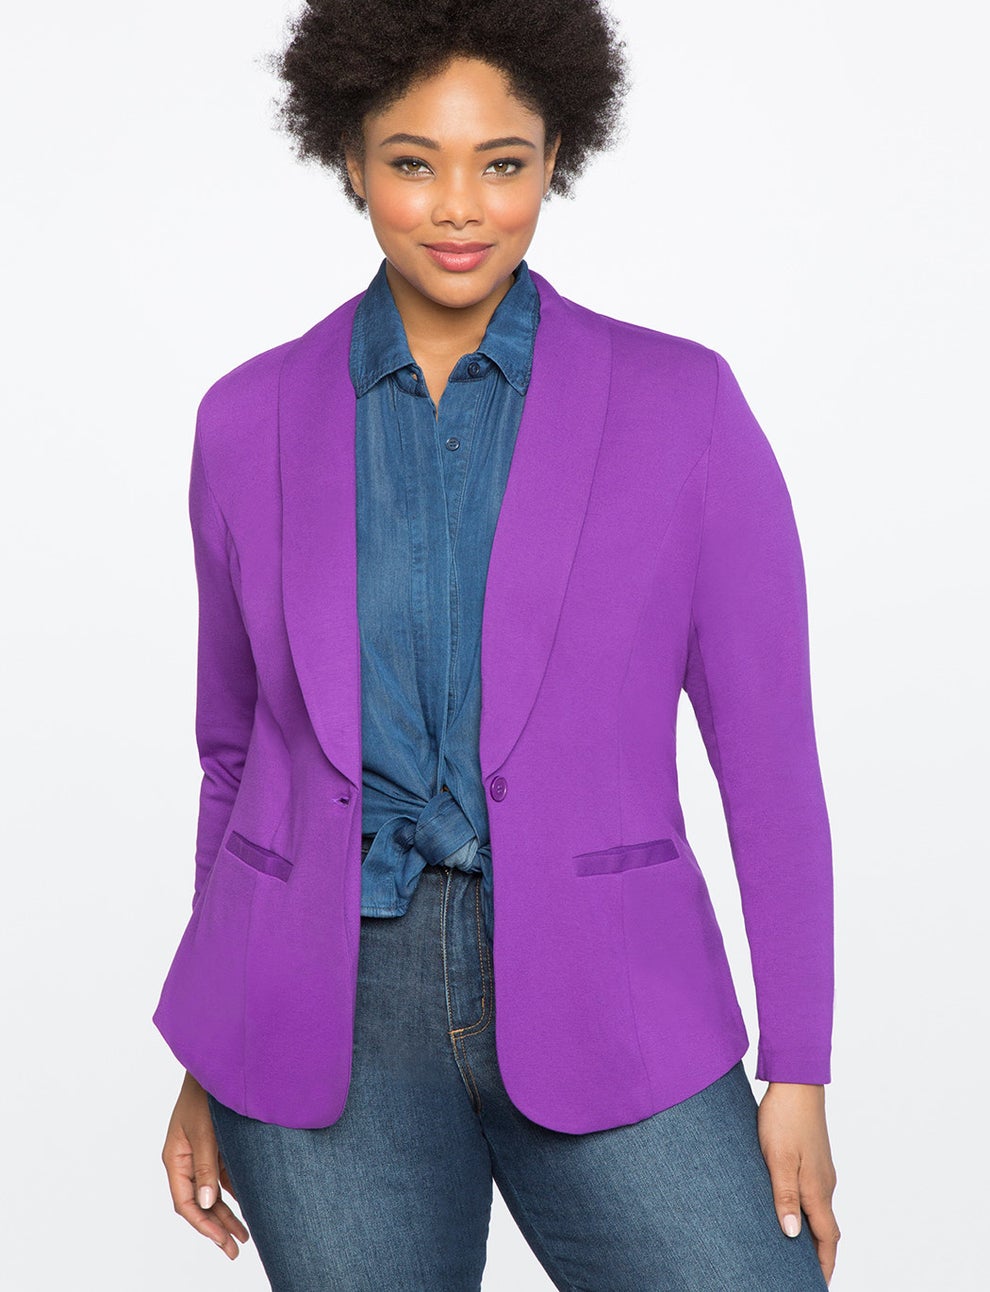 27 Gorgeous Blazers You Totally Need For Fall